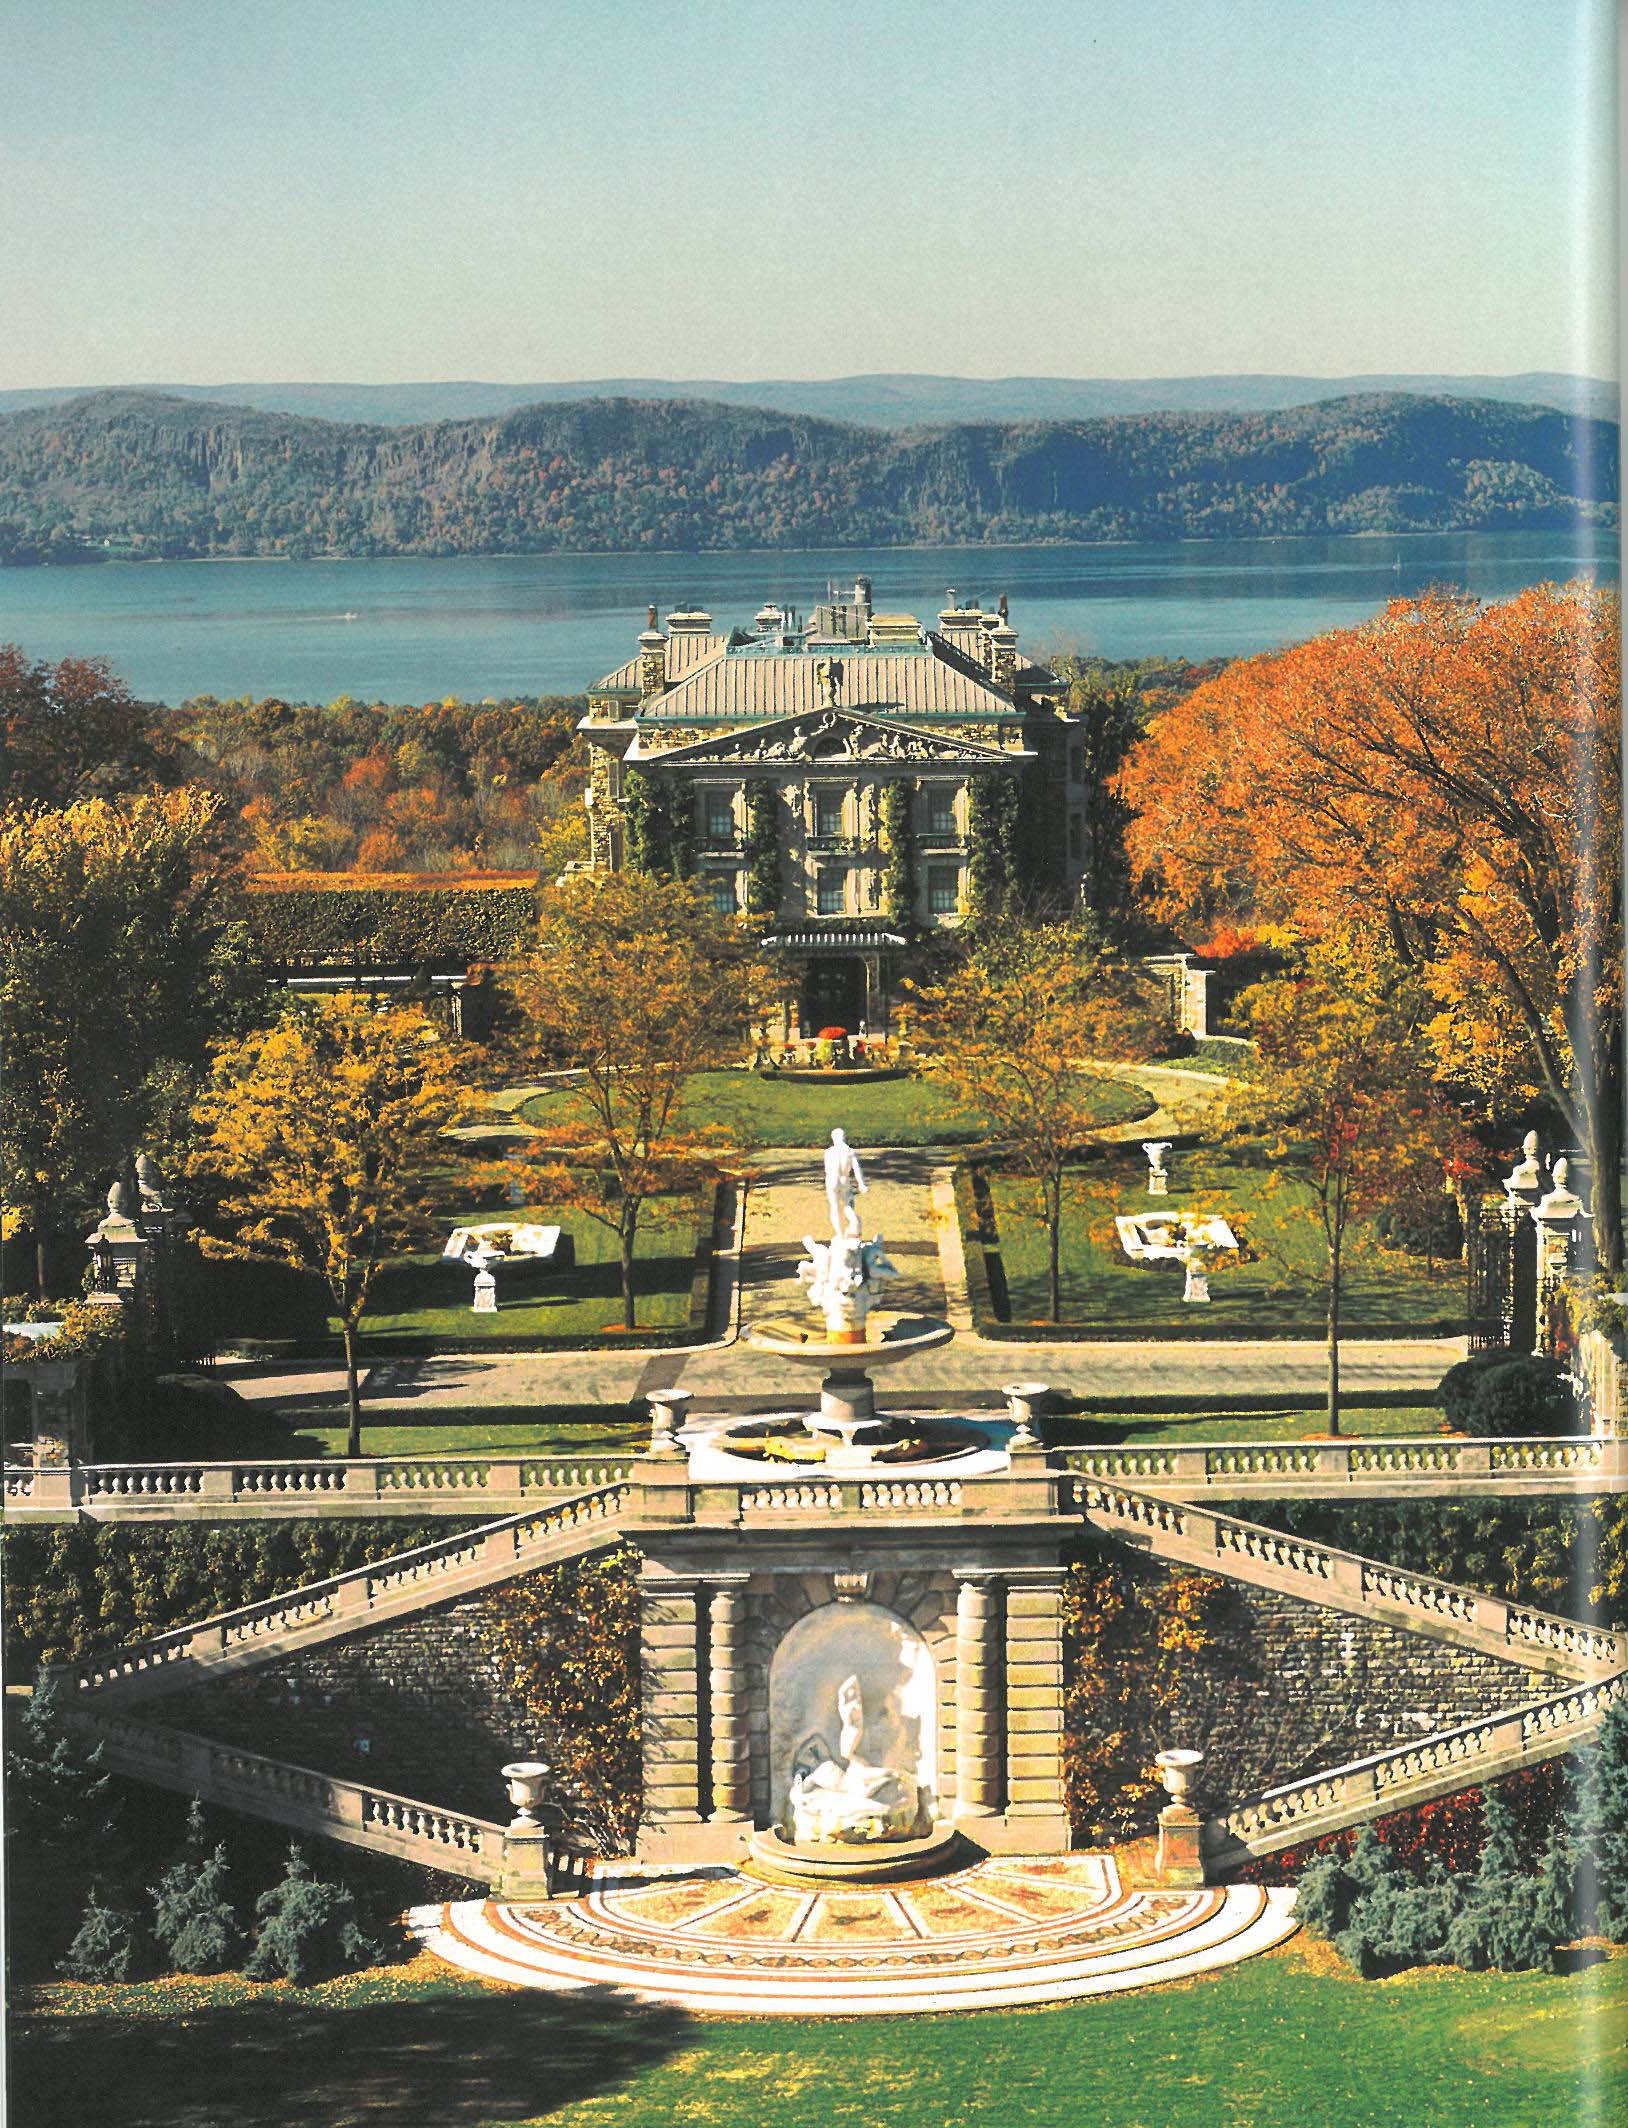 A Bird's Eye view of Kykuit. Image courtesy of "Kykuit," by Henry Joyce and the Historic Hudson Valley Press.